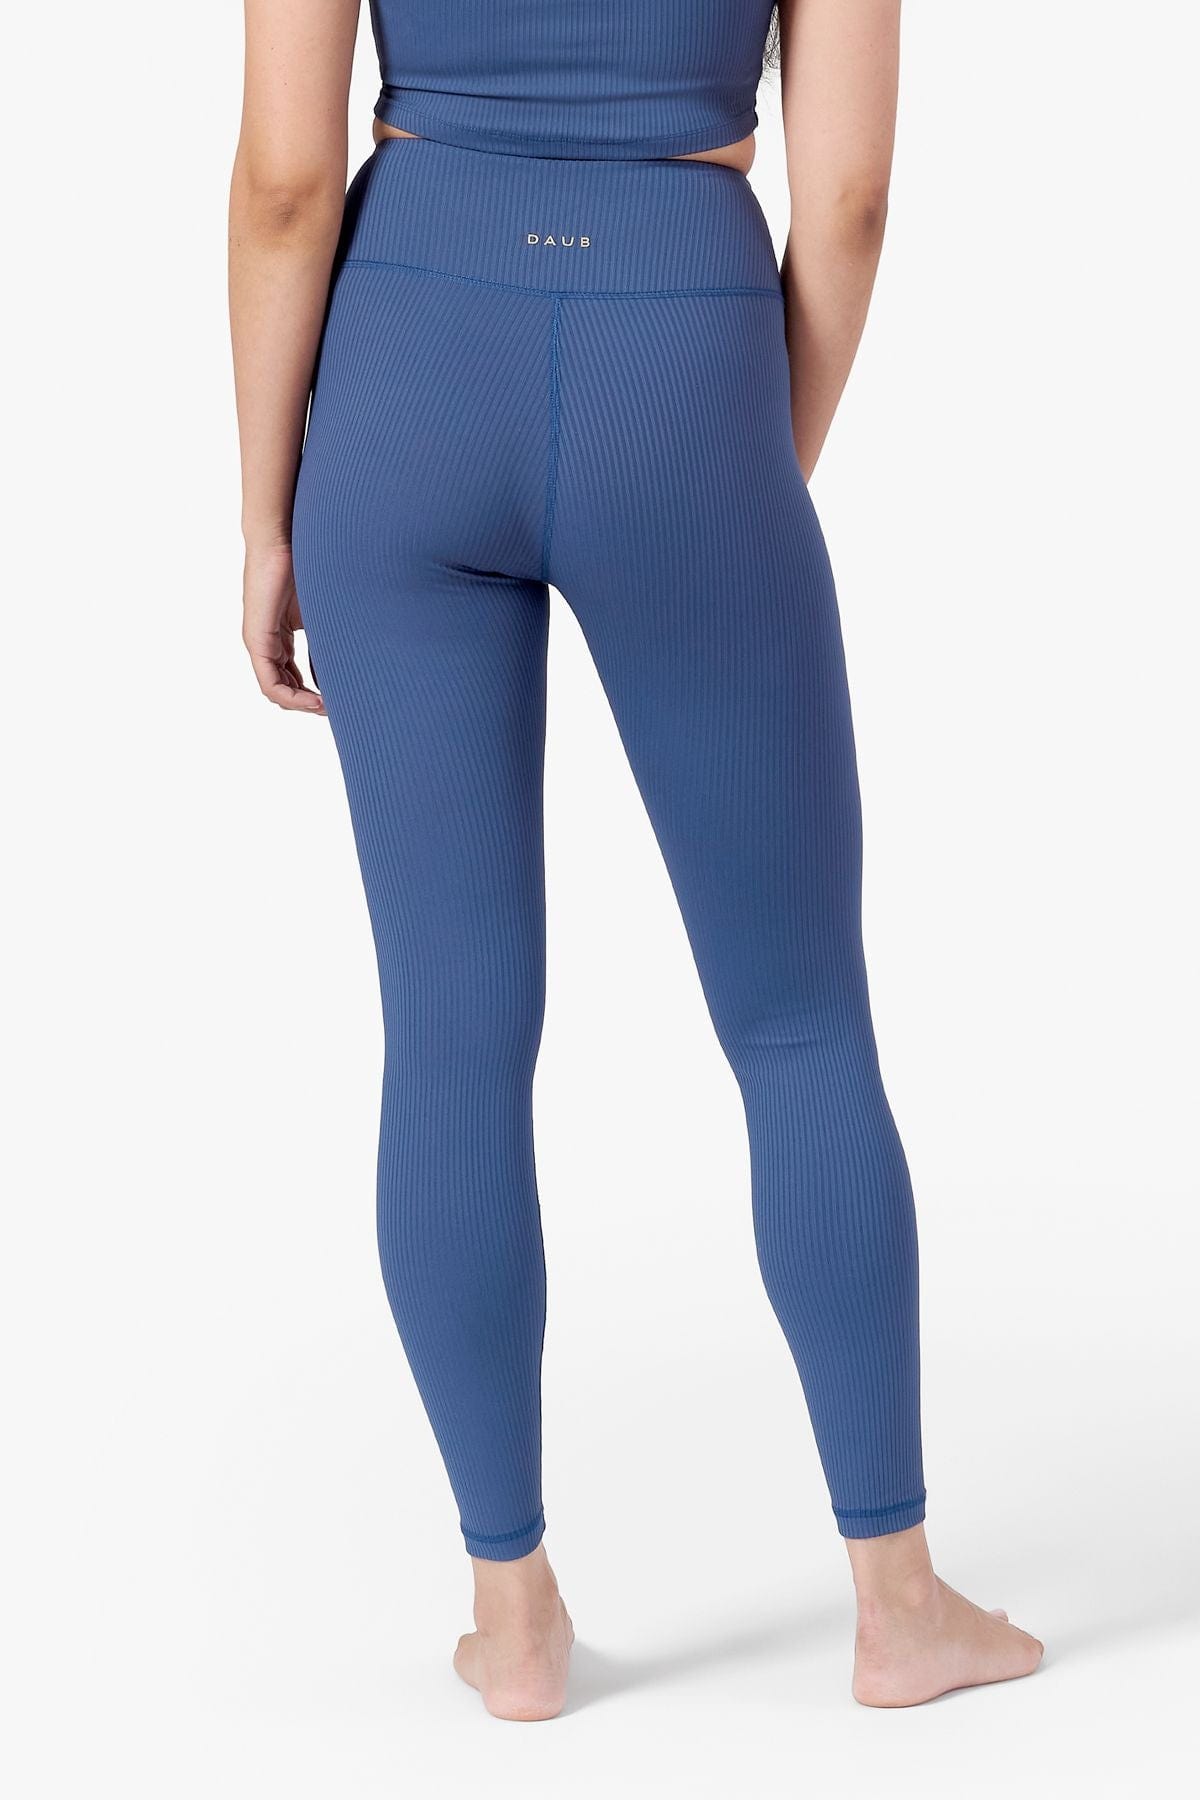 Back of a woman wearing blue ribbed leggings